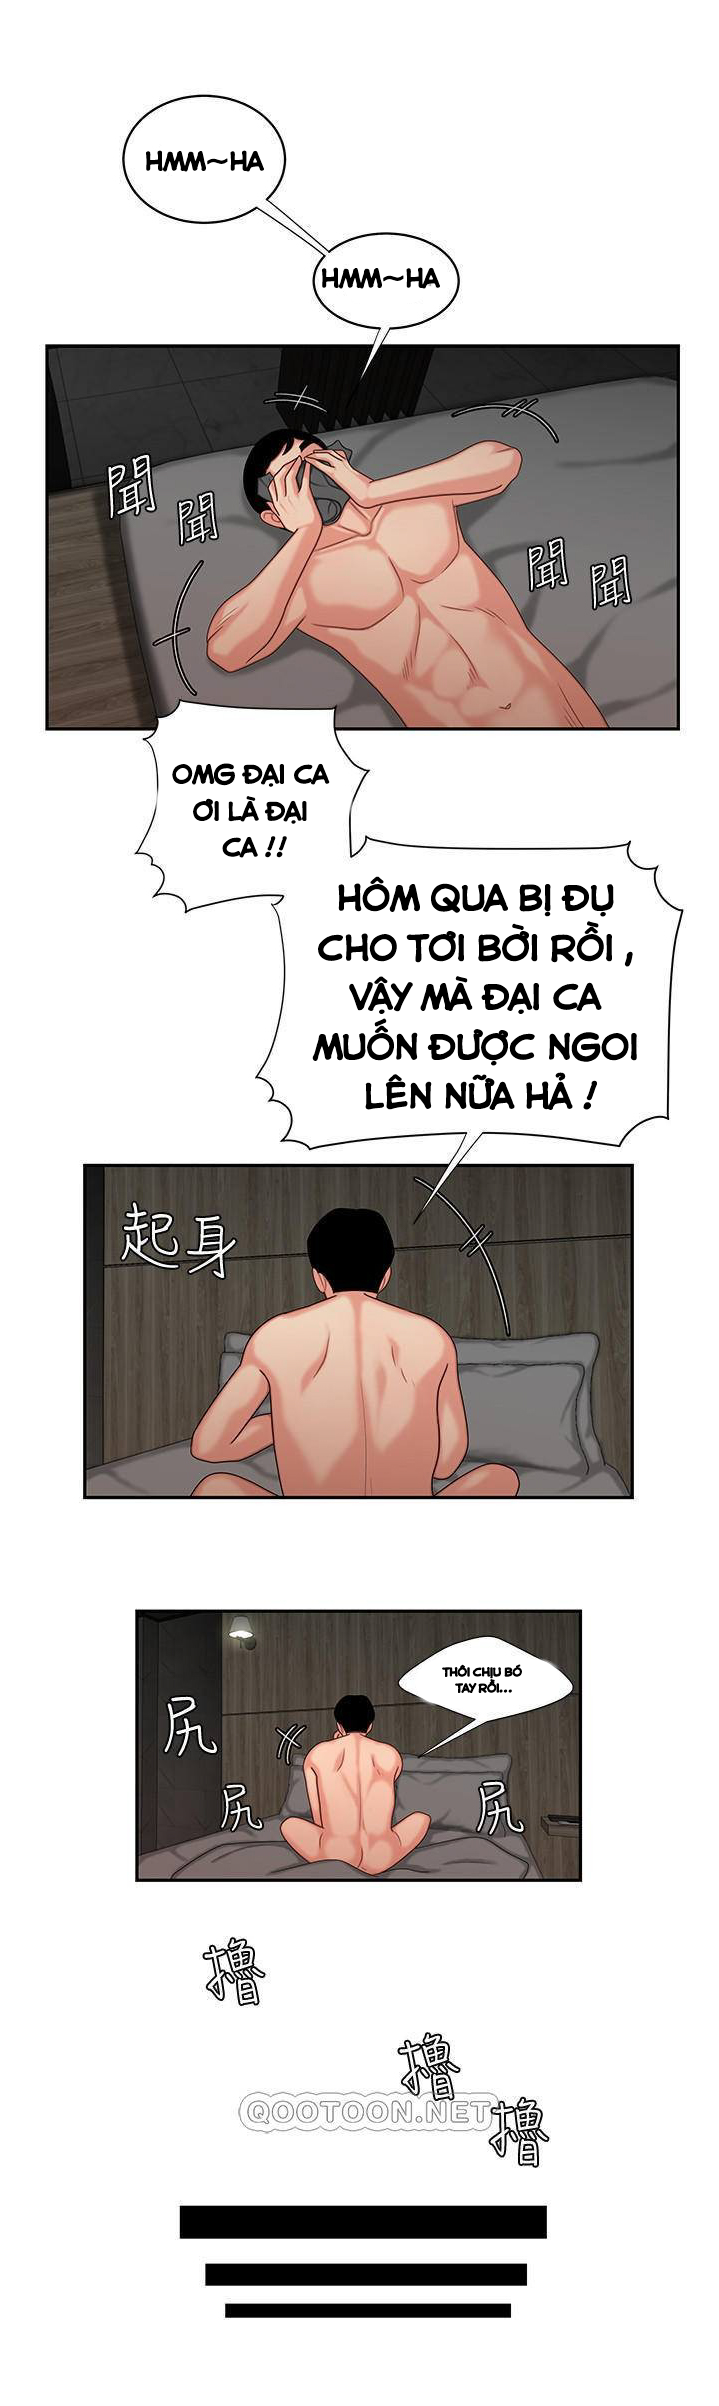 Chapter 006 : Chapter 06 ảnh 9